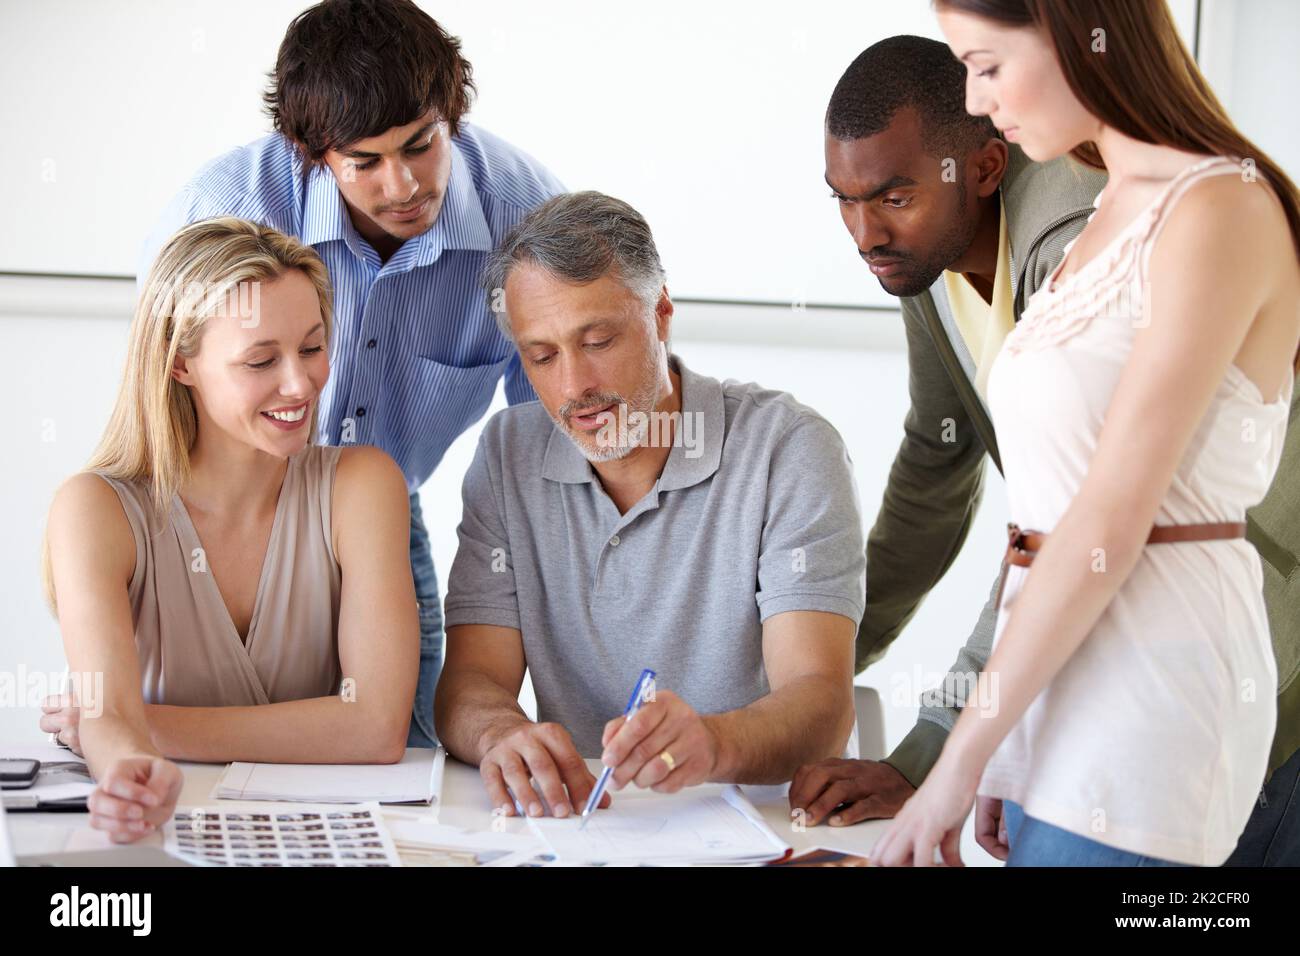 Choosing the right models for their campaign. A group of business people choosing models for an advertising campaign they are working on. Stock Photo